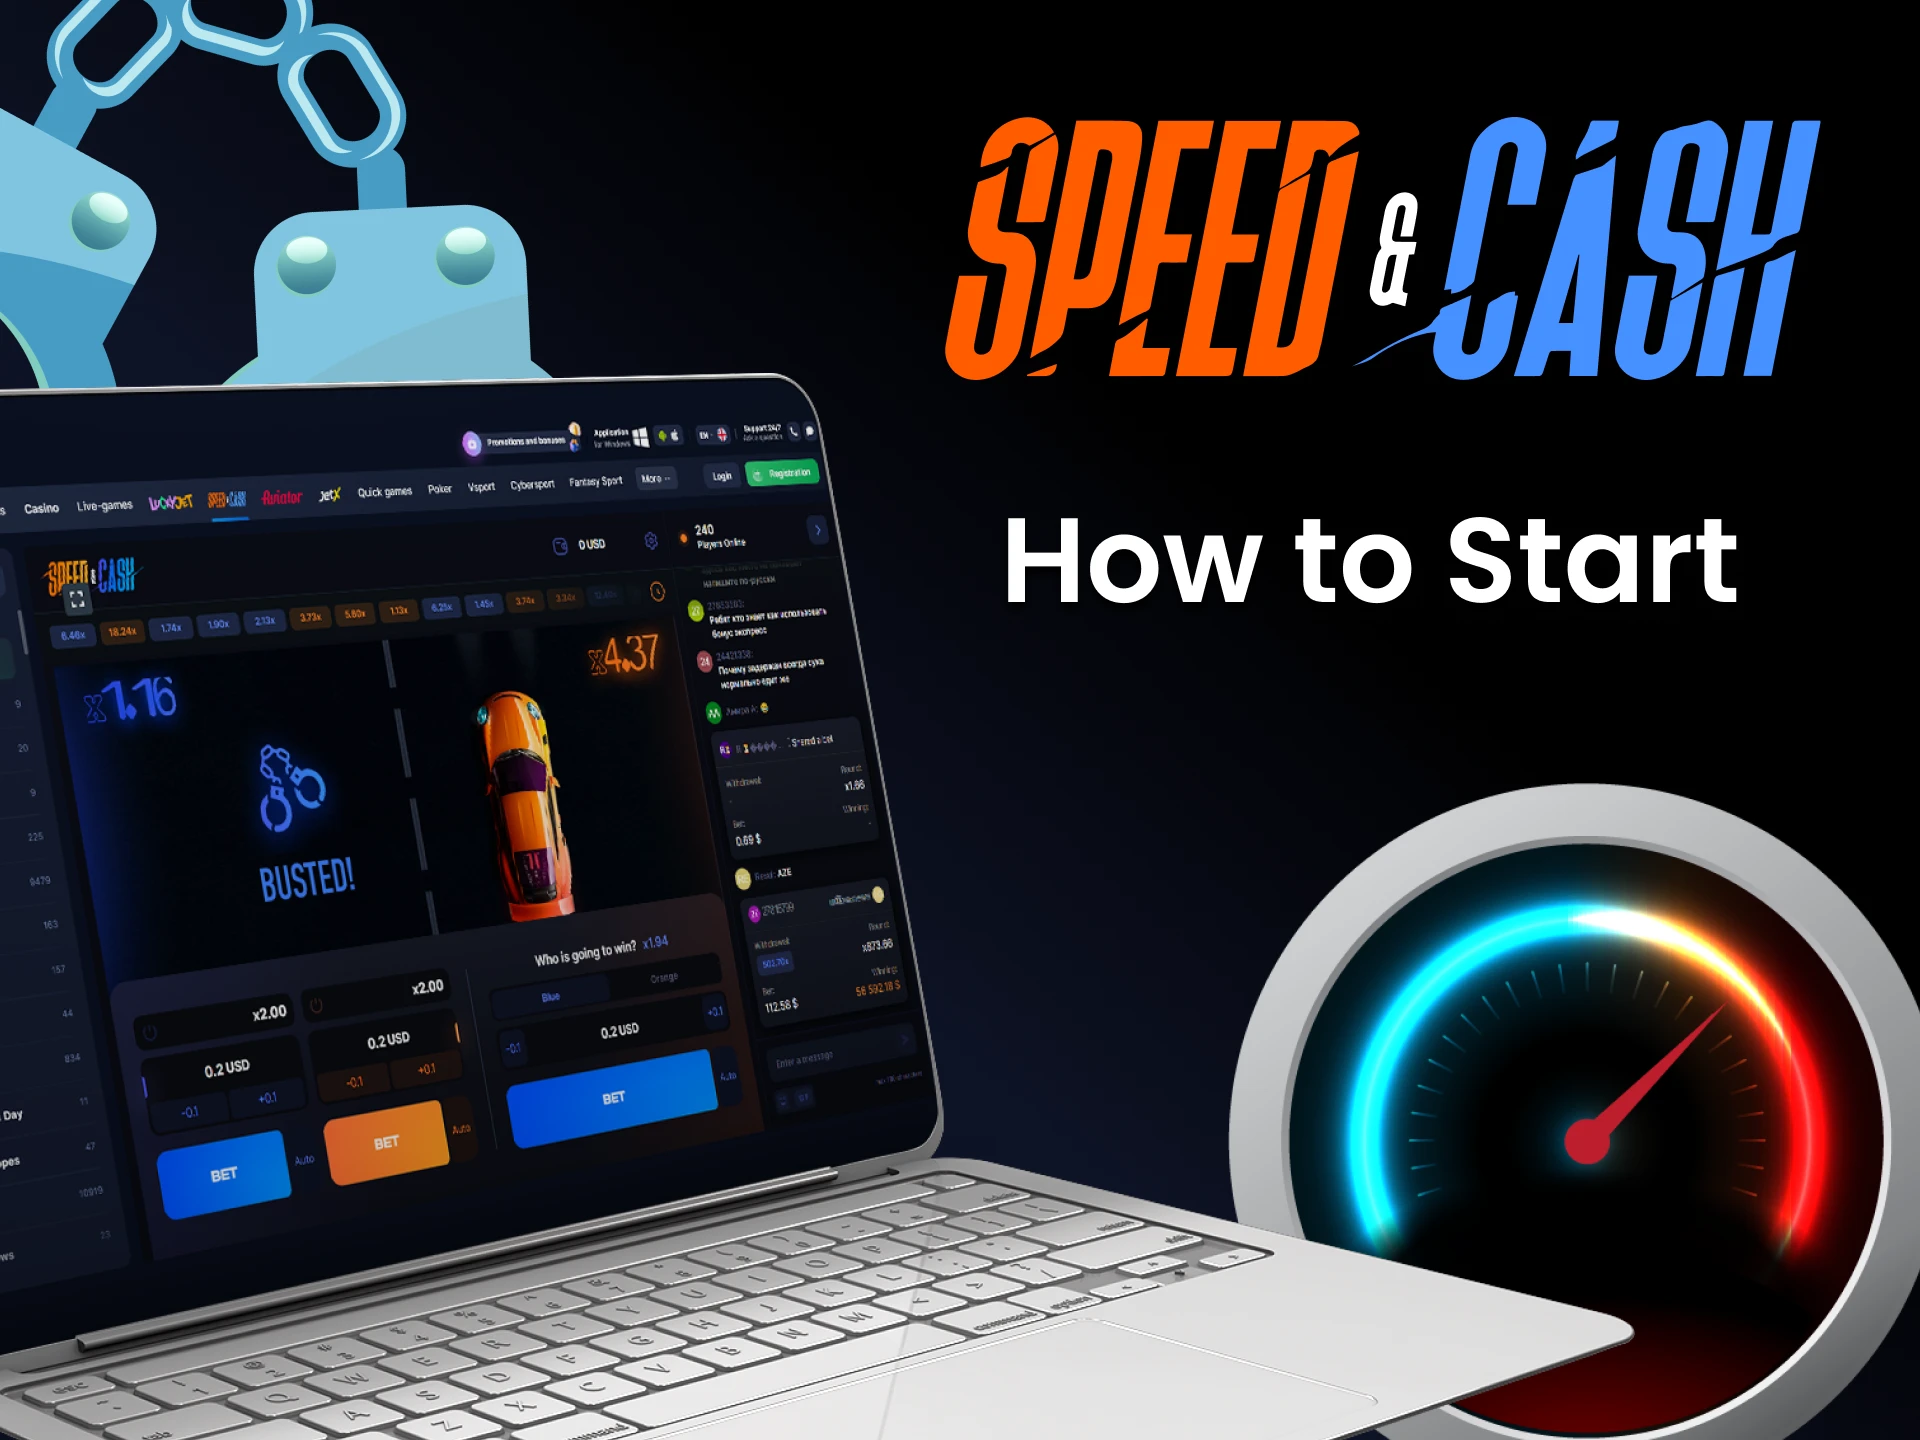 Go to the desired section on the service with the game Speed&Cash.